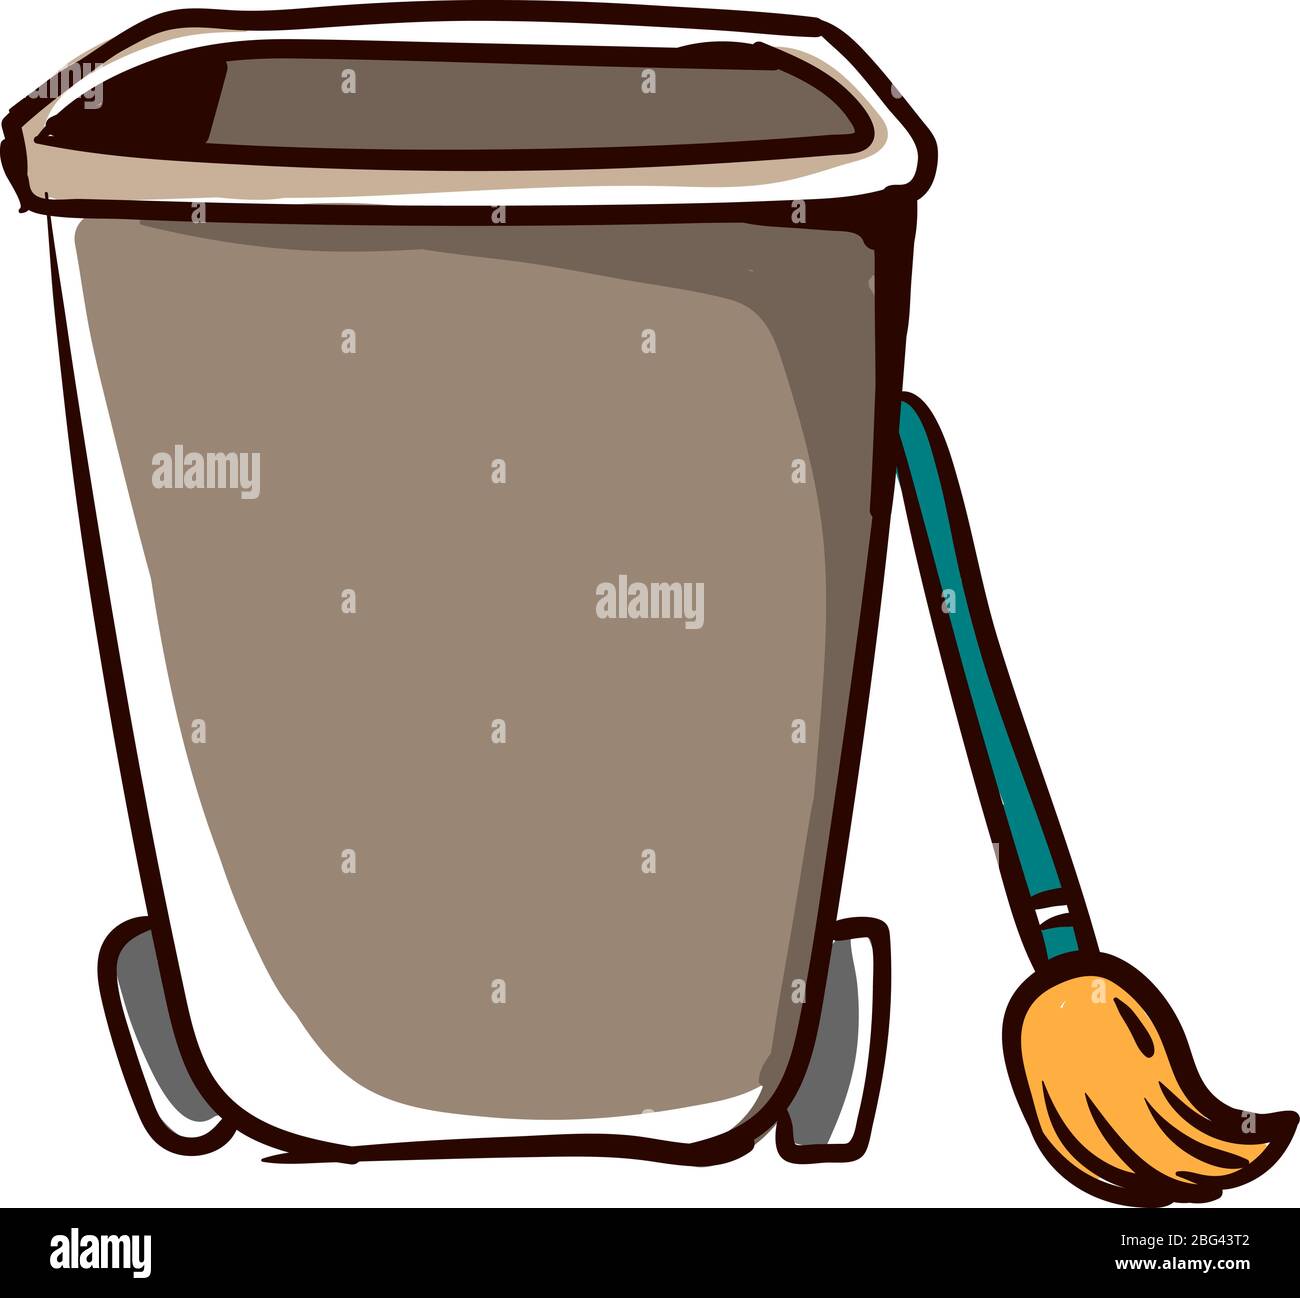 Bin with broom, illustration, vector on white background Stock Vector